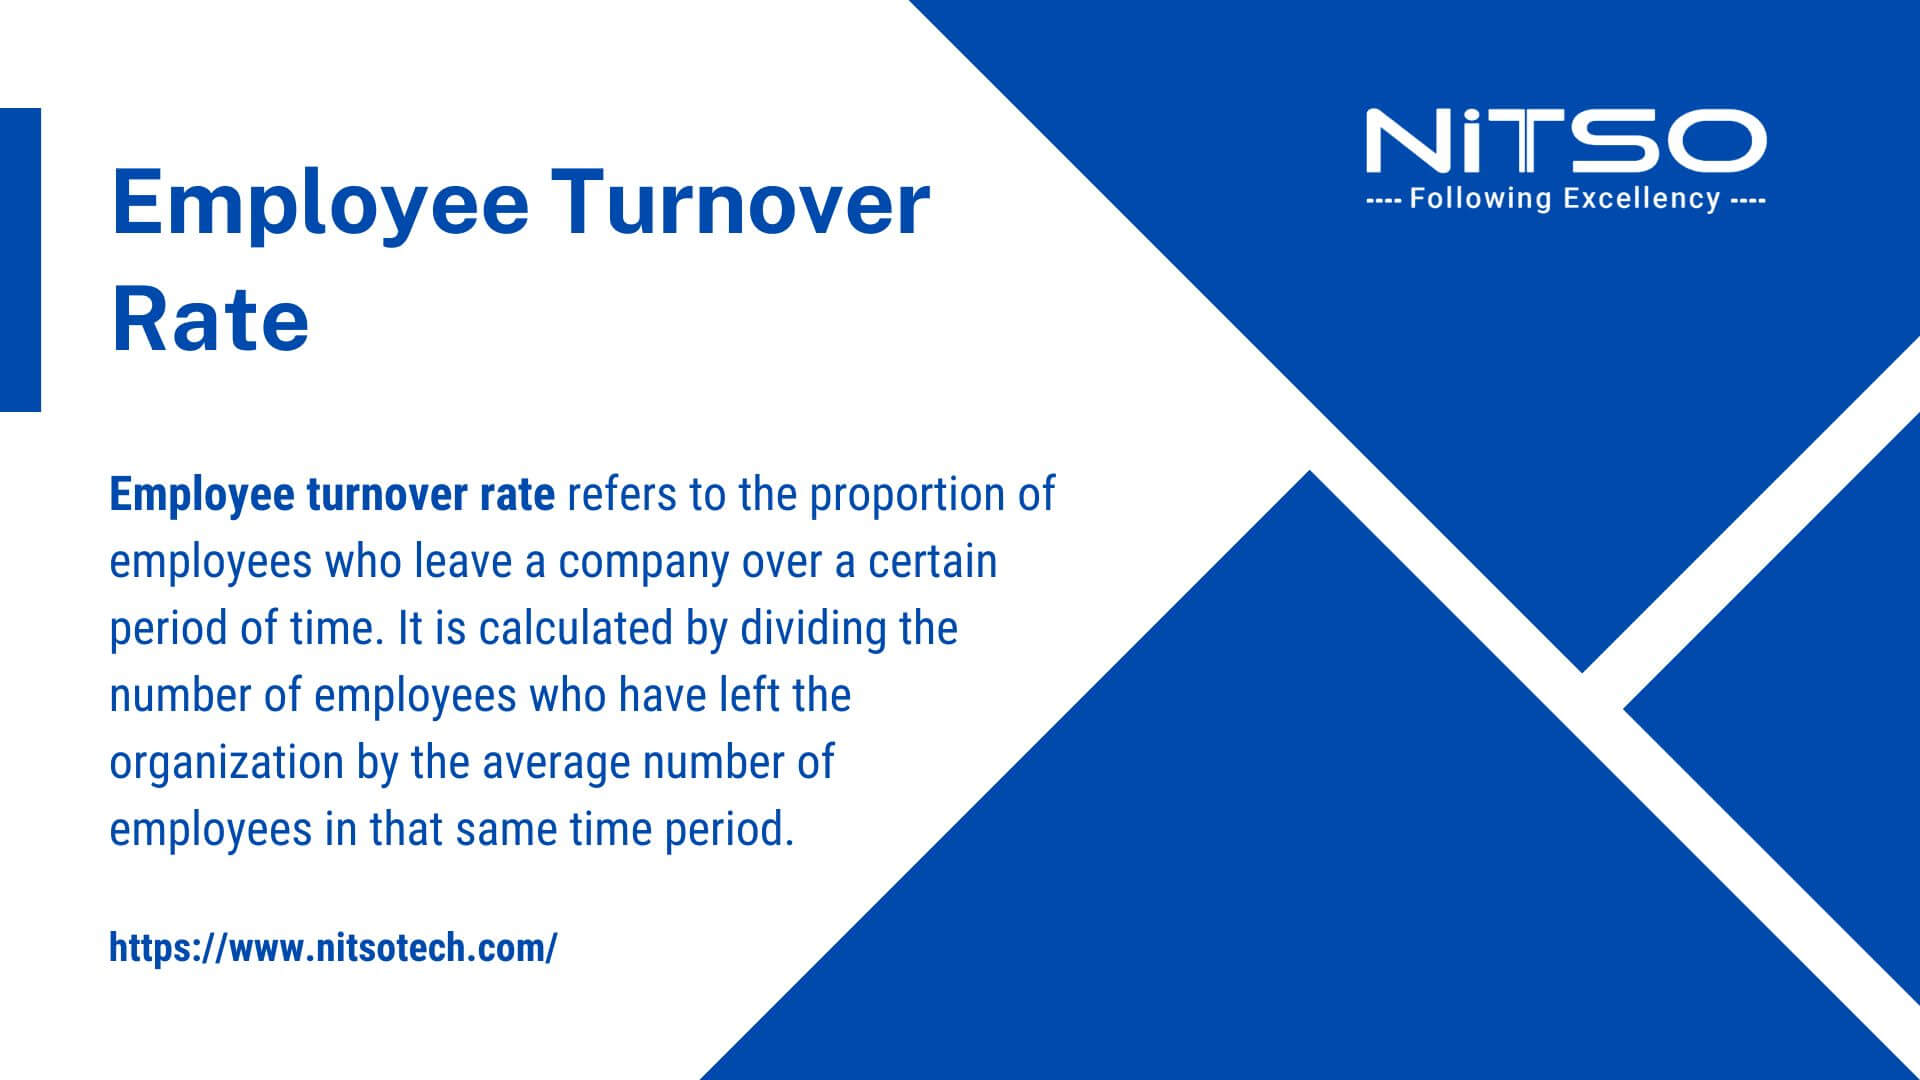 What is Employee Turnover Rate?